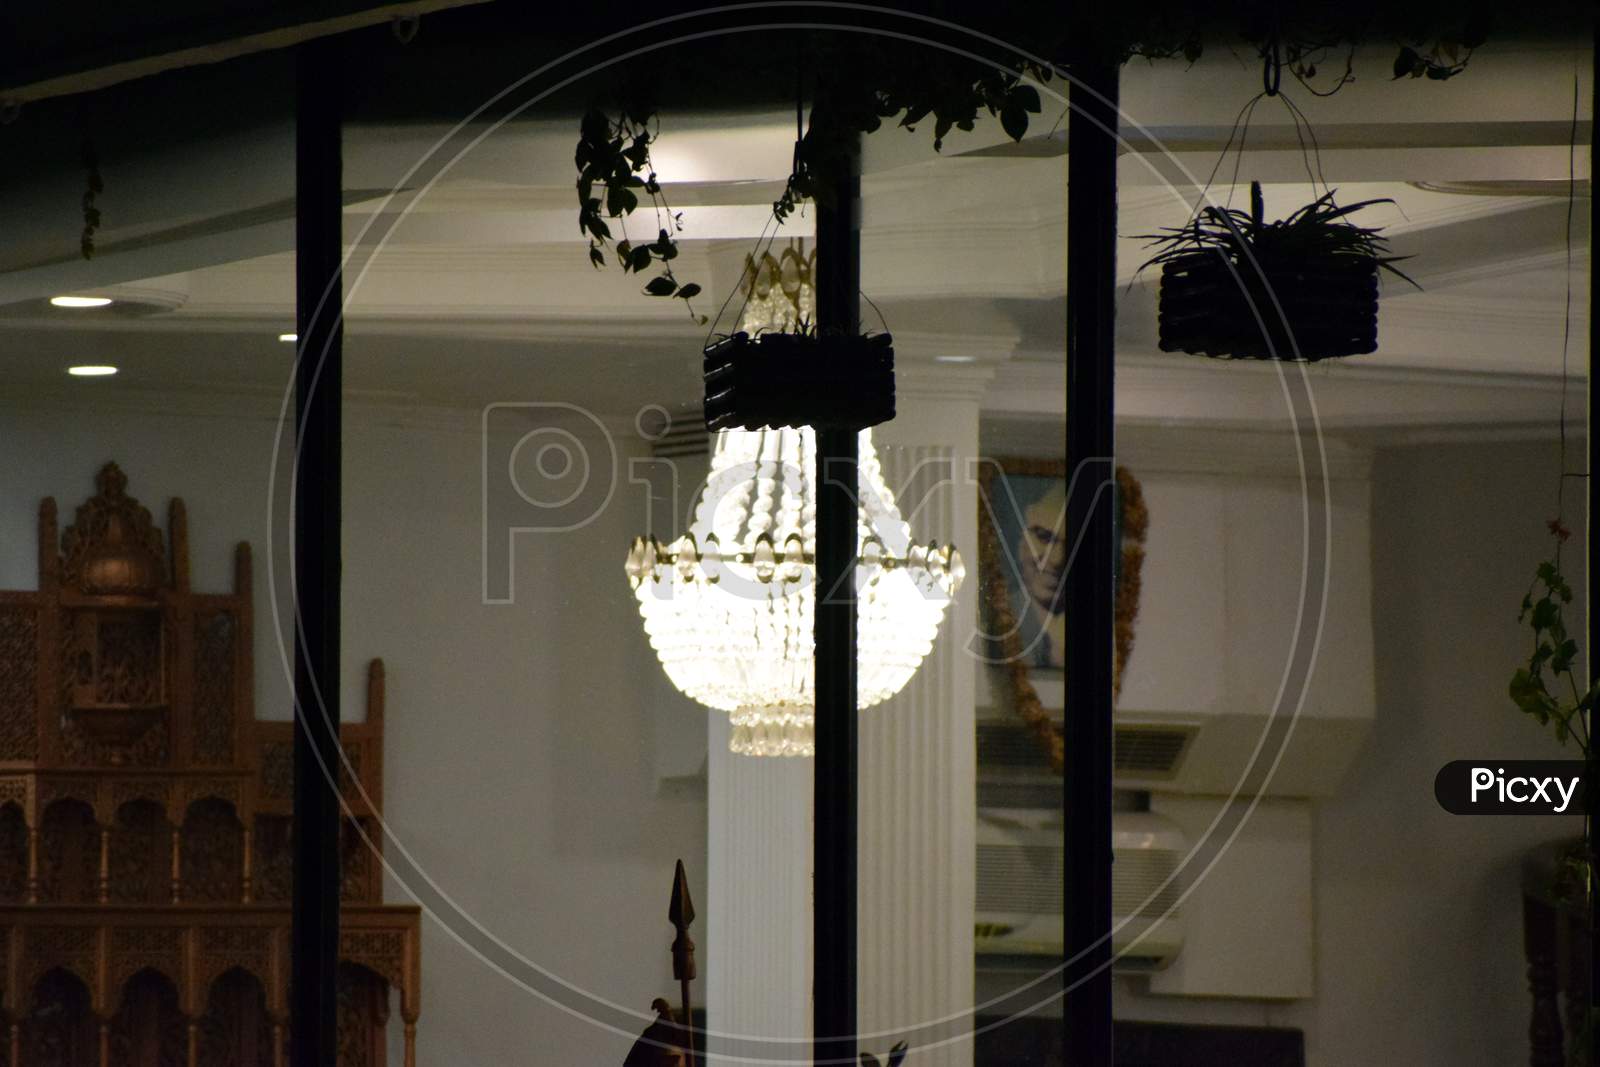 Beautiful Picture Of Light Lamp On Hotel, Selective Focus On Subject